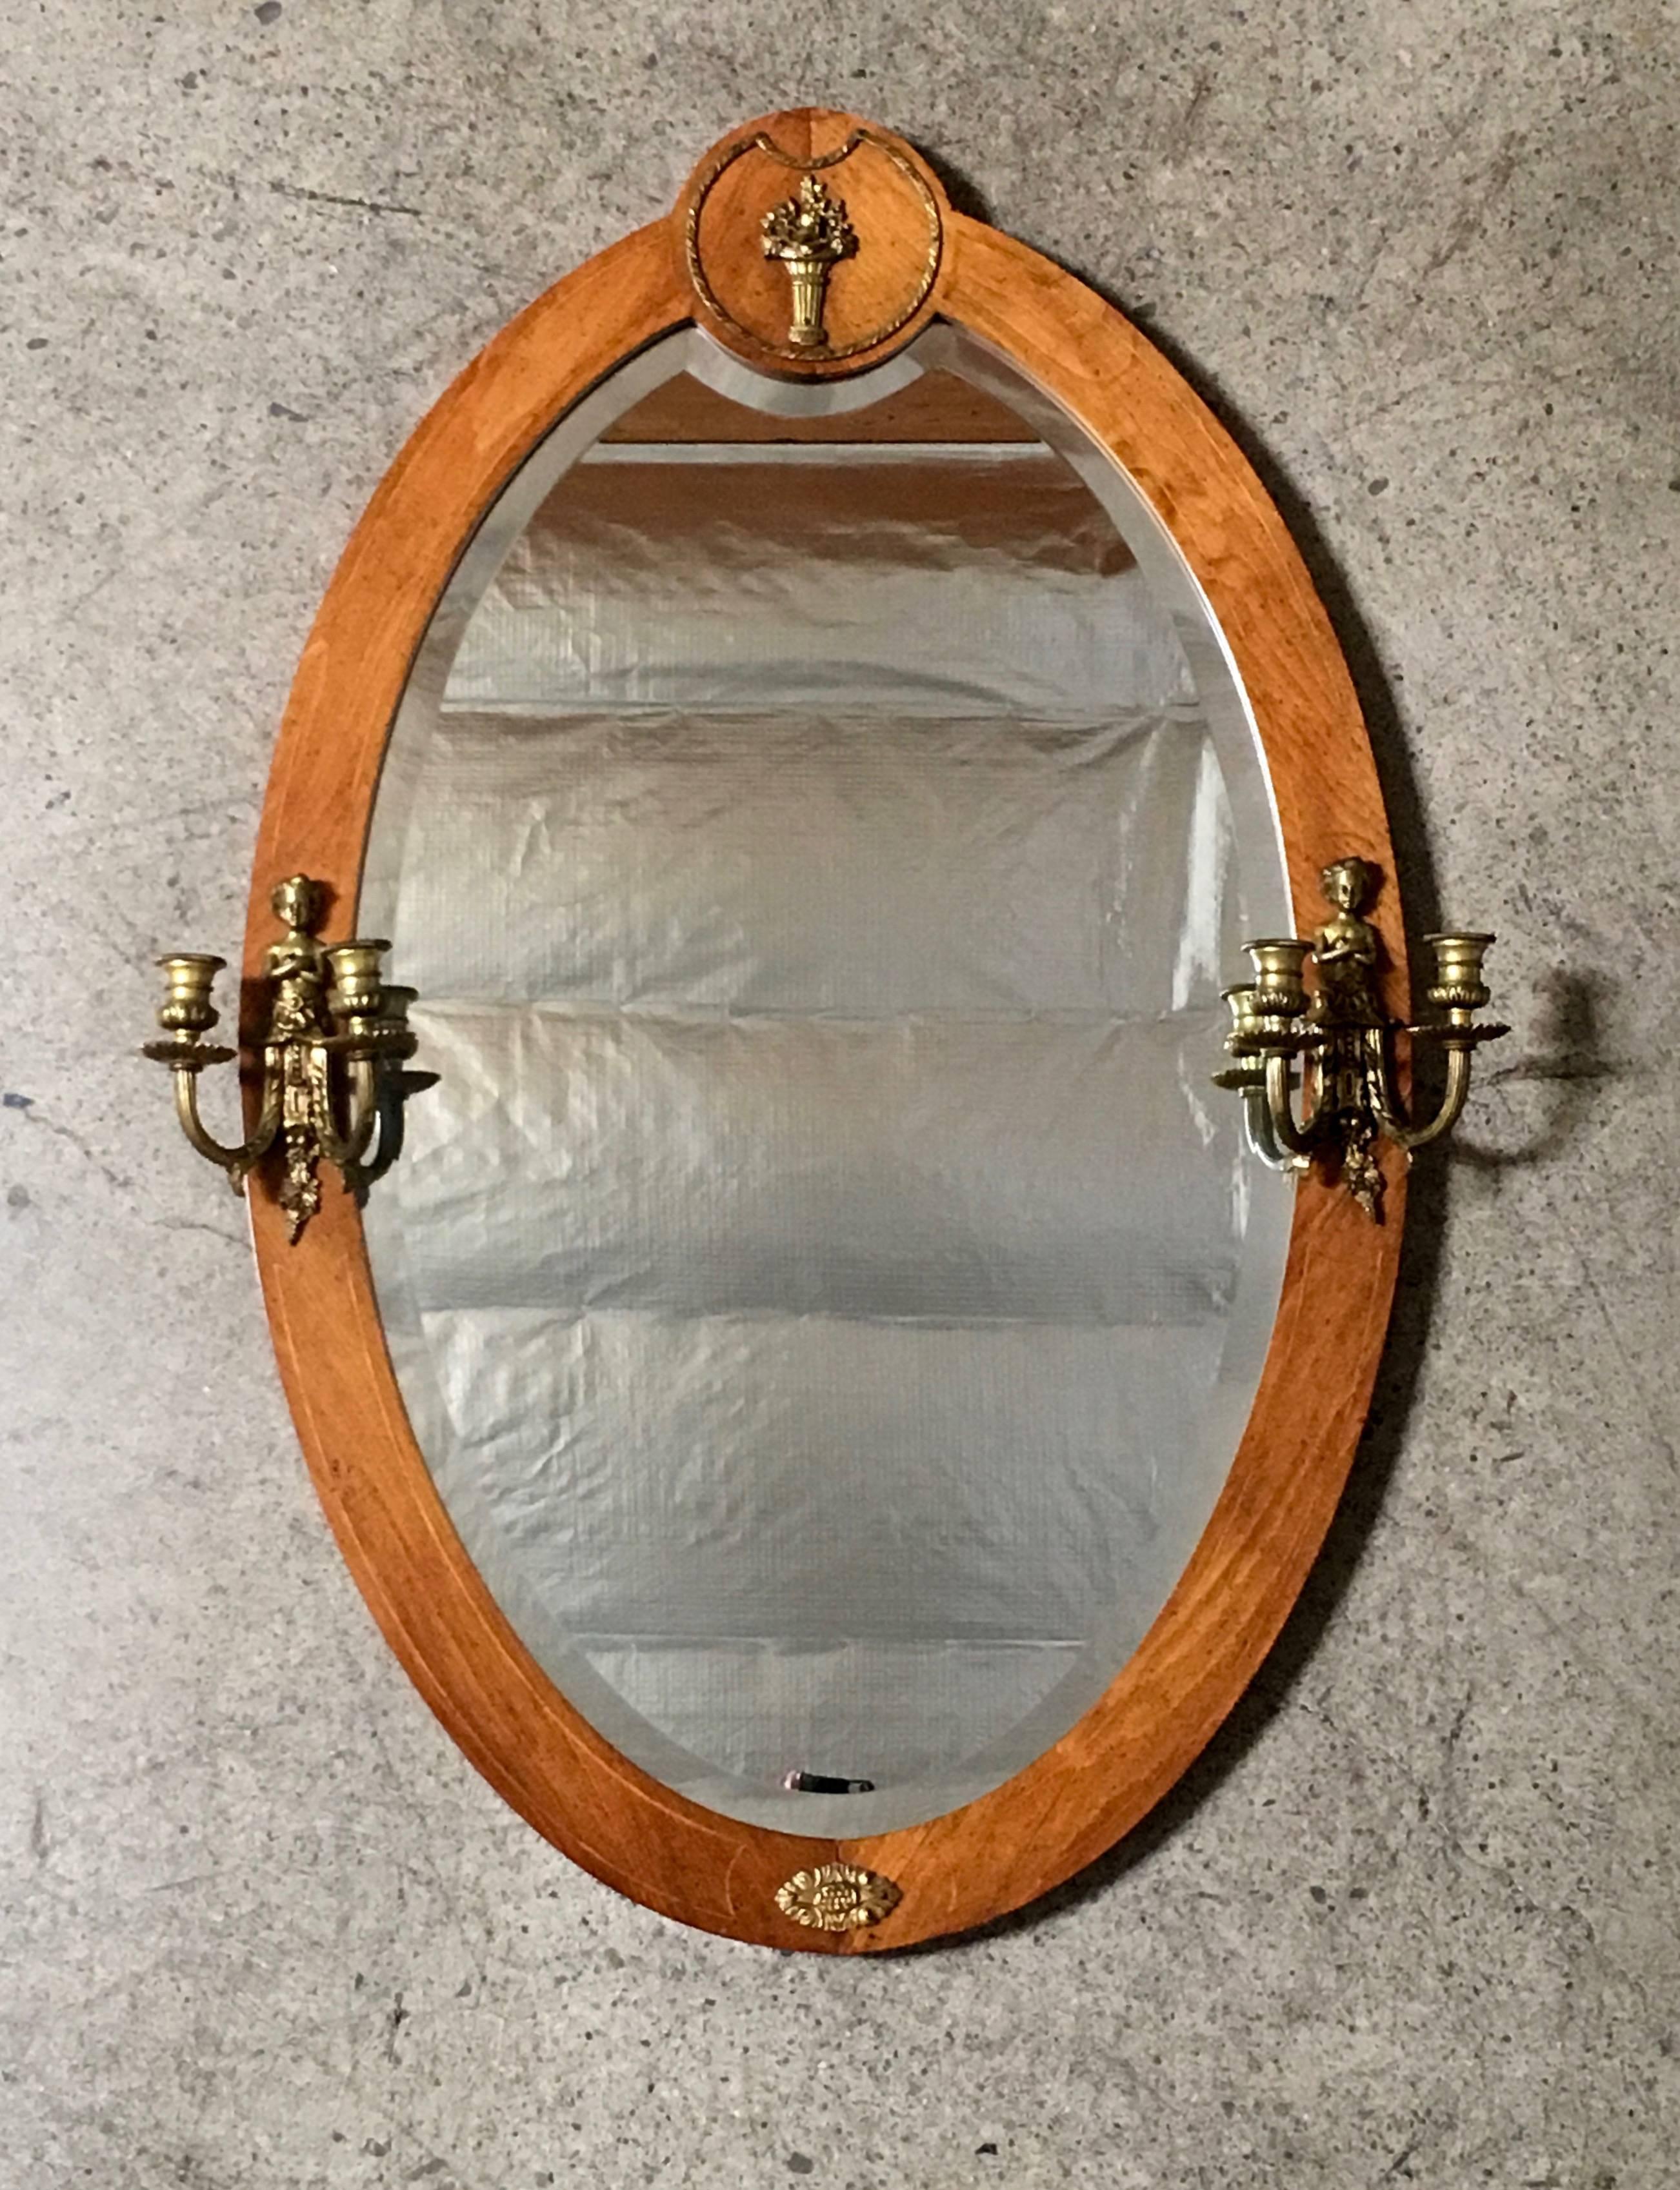 Oval beveled mirror with inlaid wood frame and brass sconces. This can be used with candles or converted to electric.